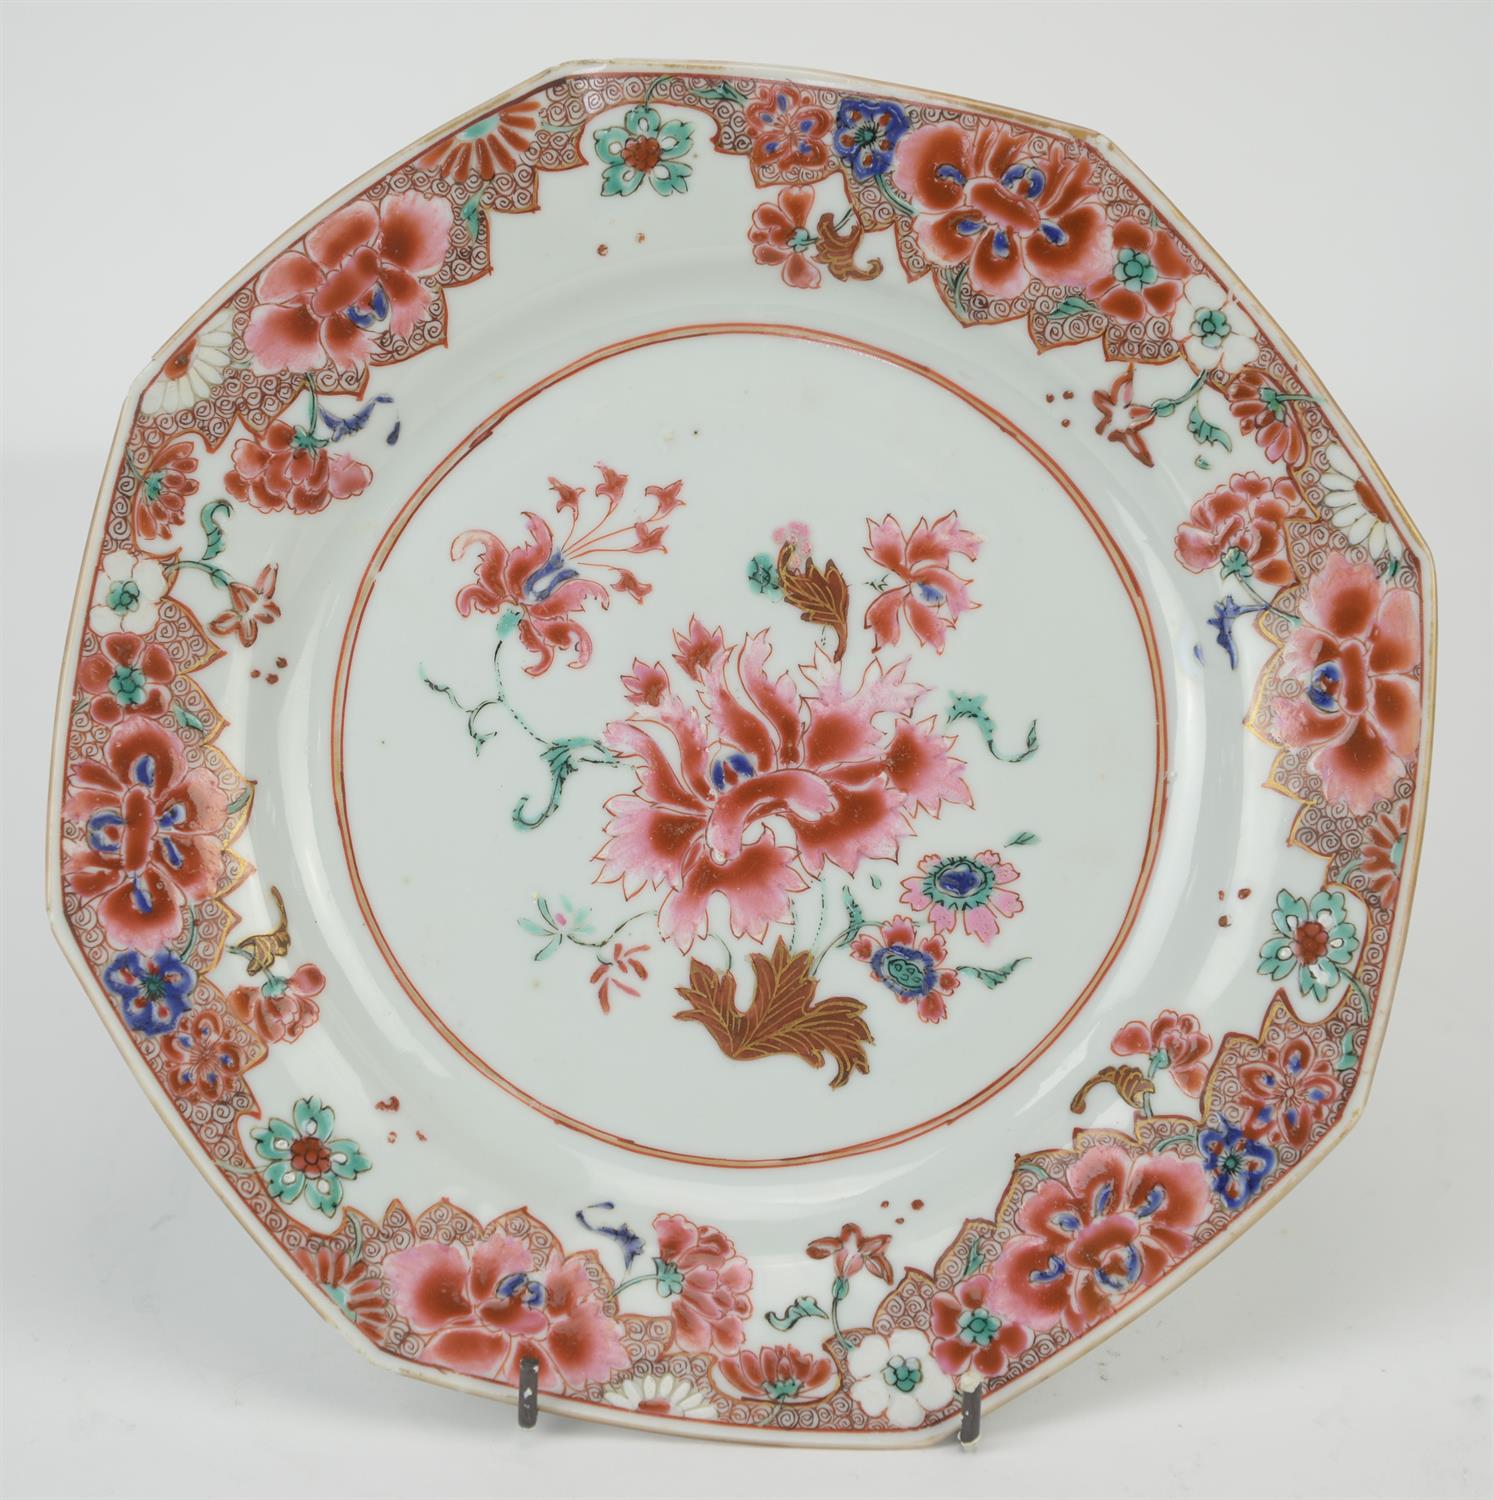 Eight famille rose dishes; each one decorated with floral designs and about 22.5 cm diameter - Image 14 of 14